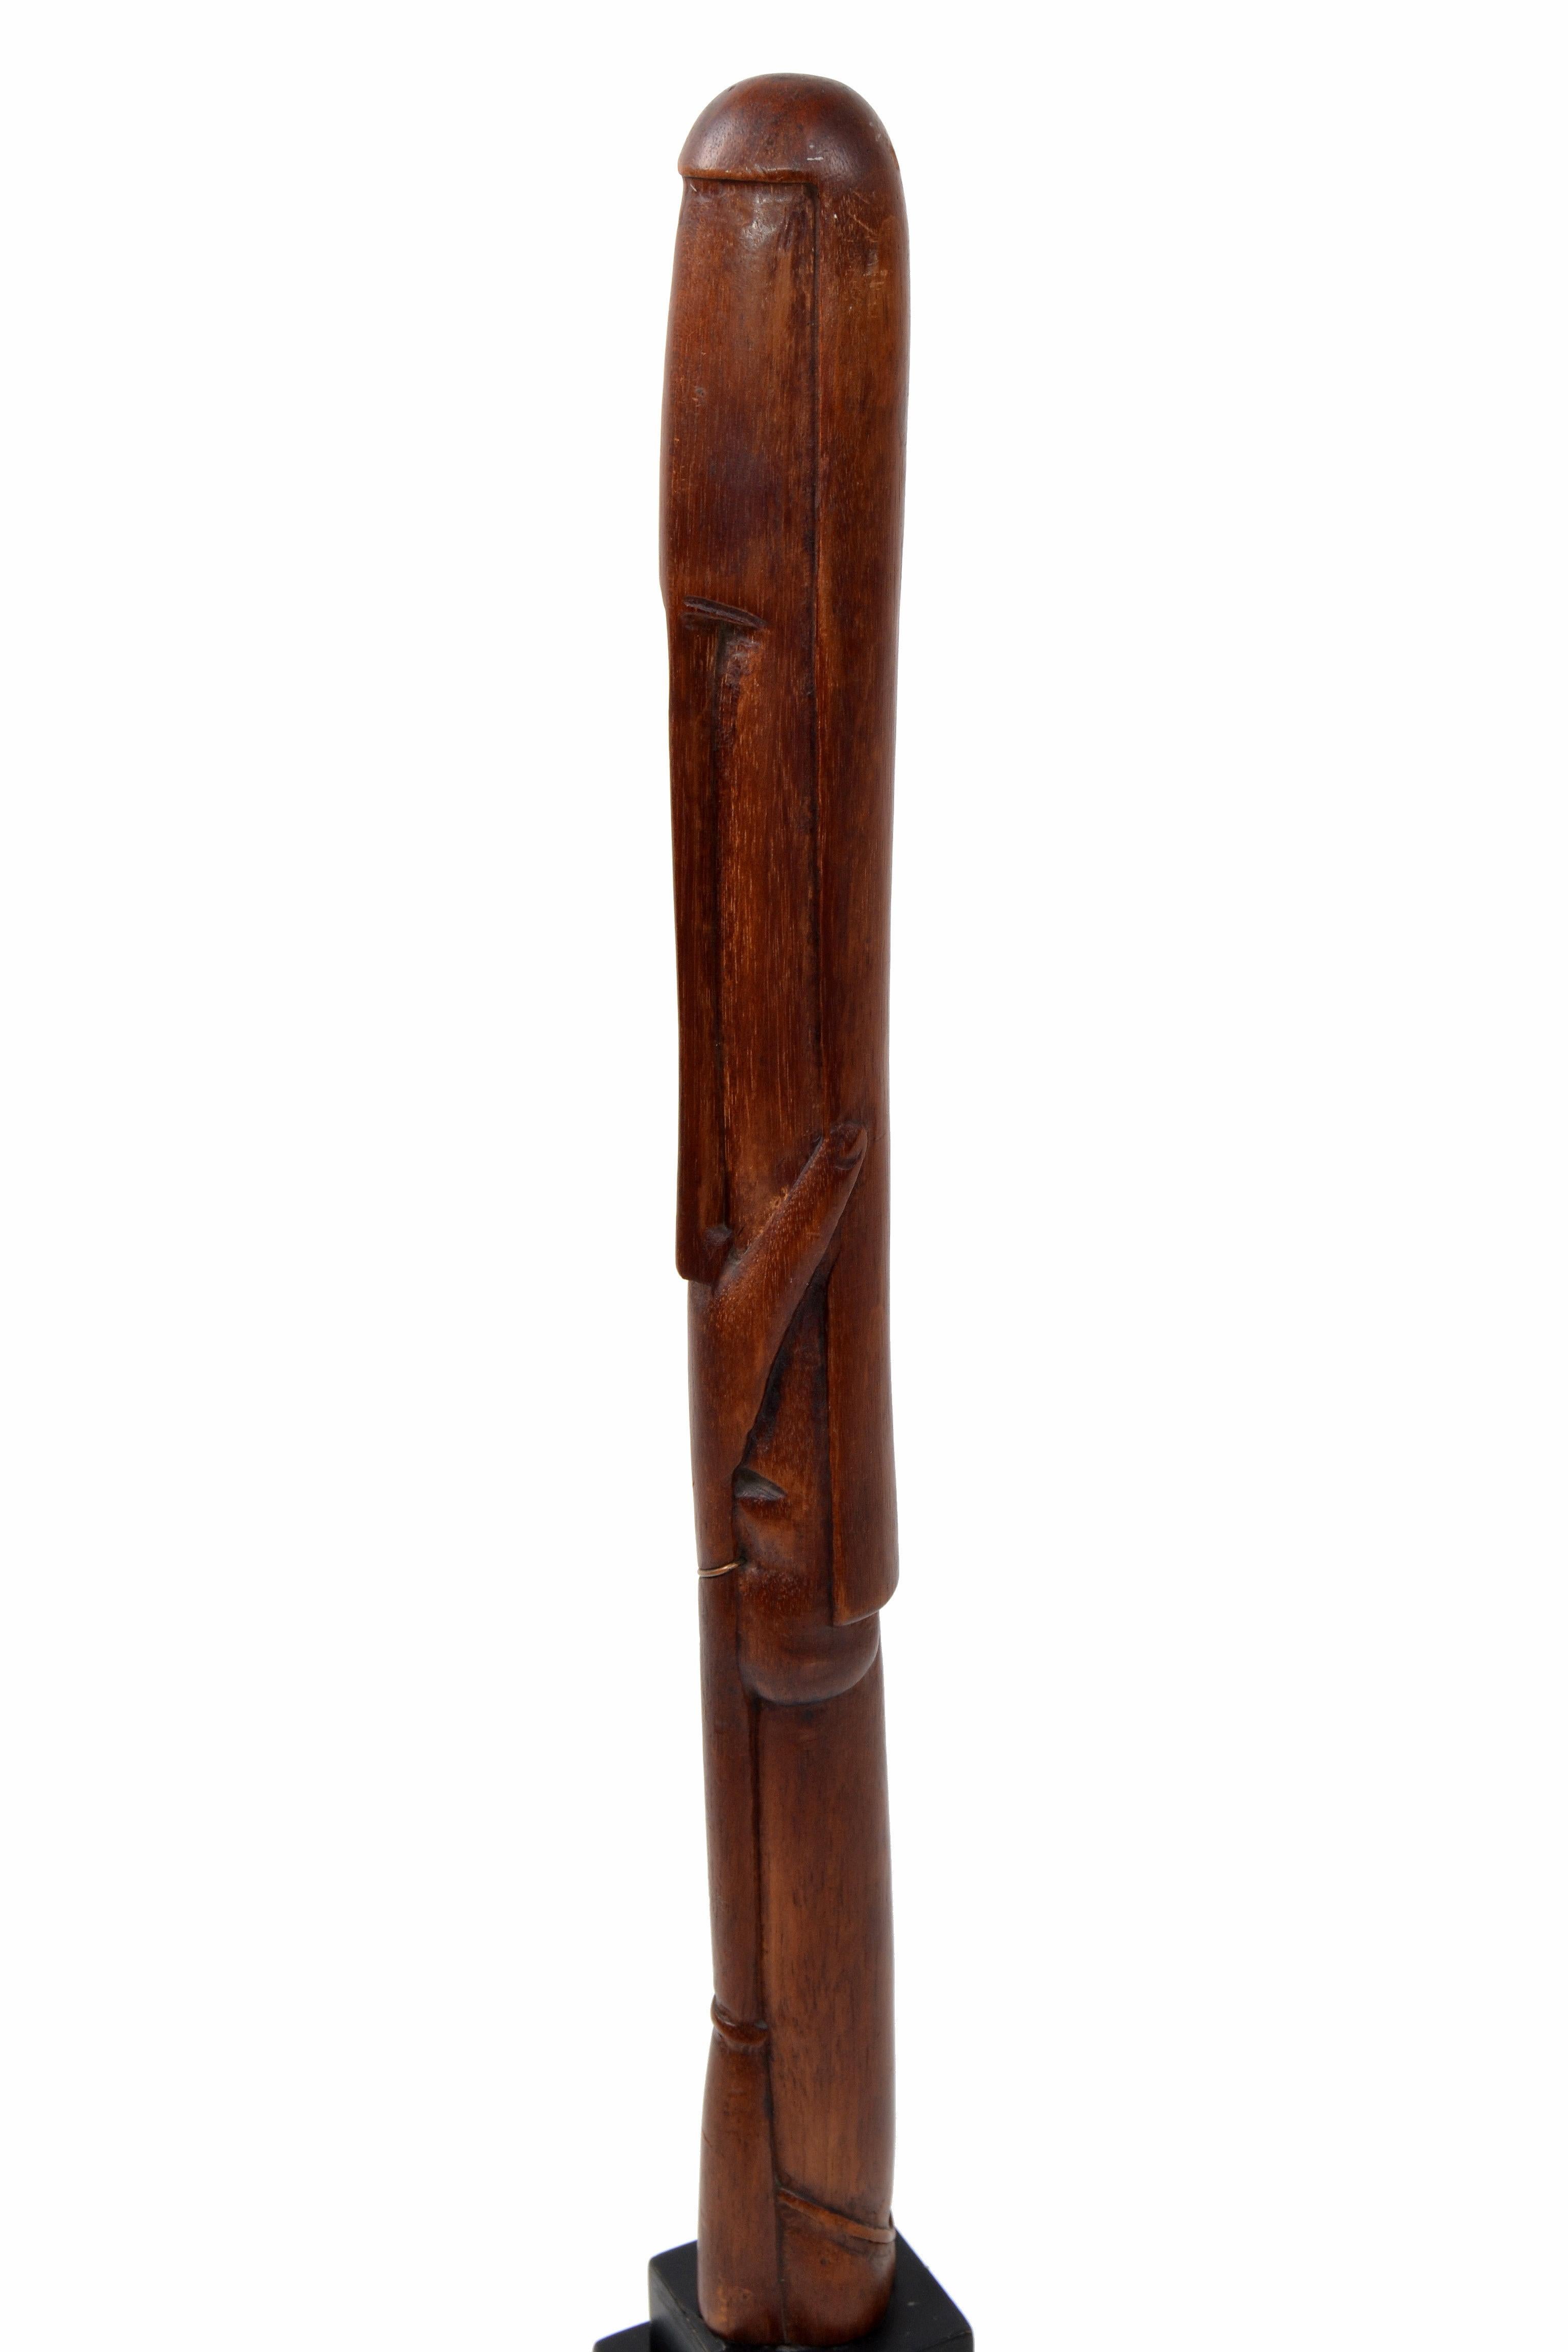 Hand-Carved African Tribal Art Hand Carved Mahogany Wooden Sculpture, Decorative Object